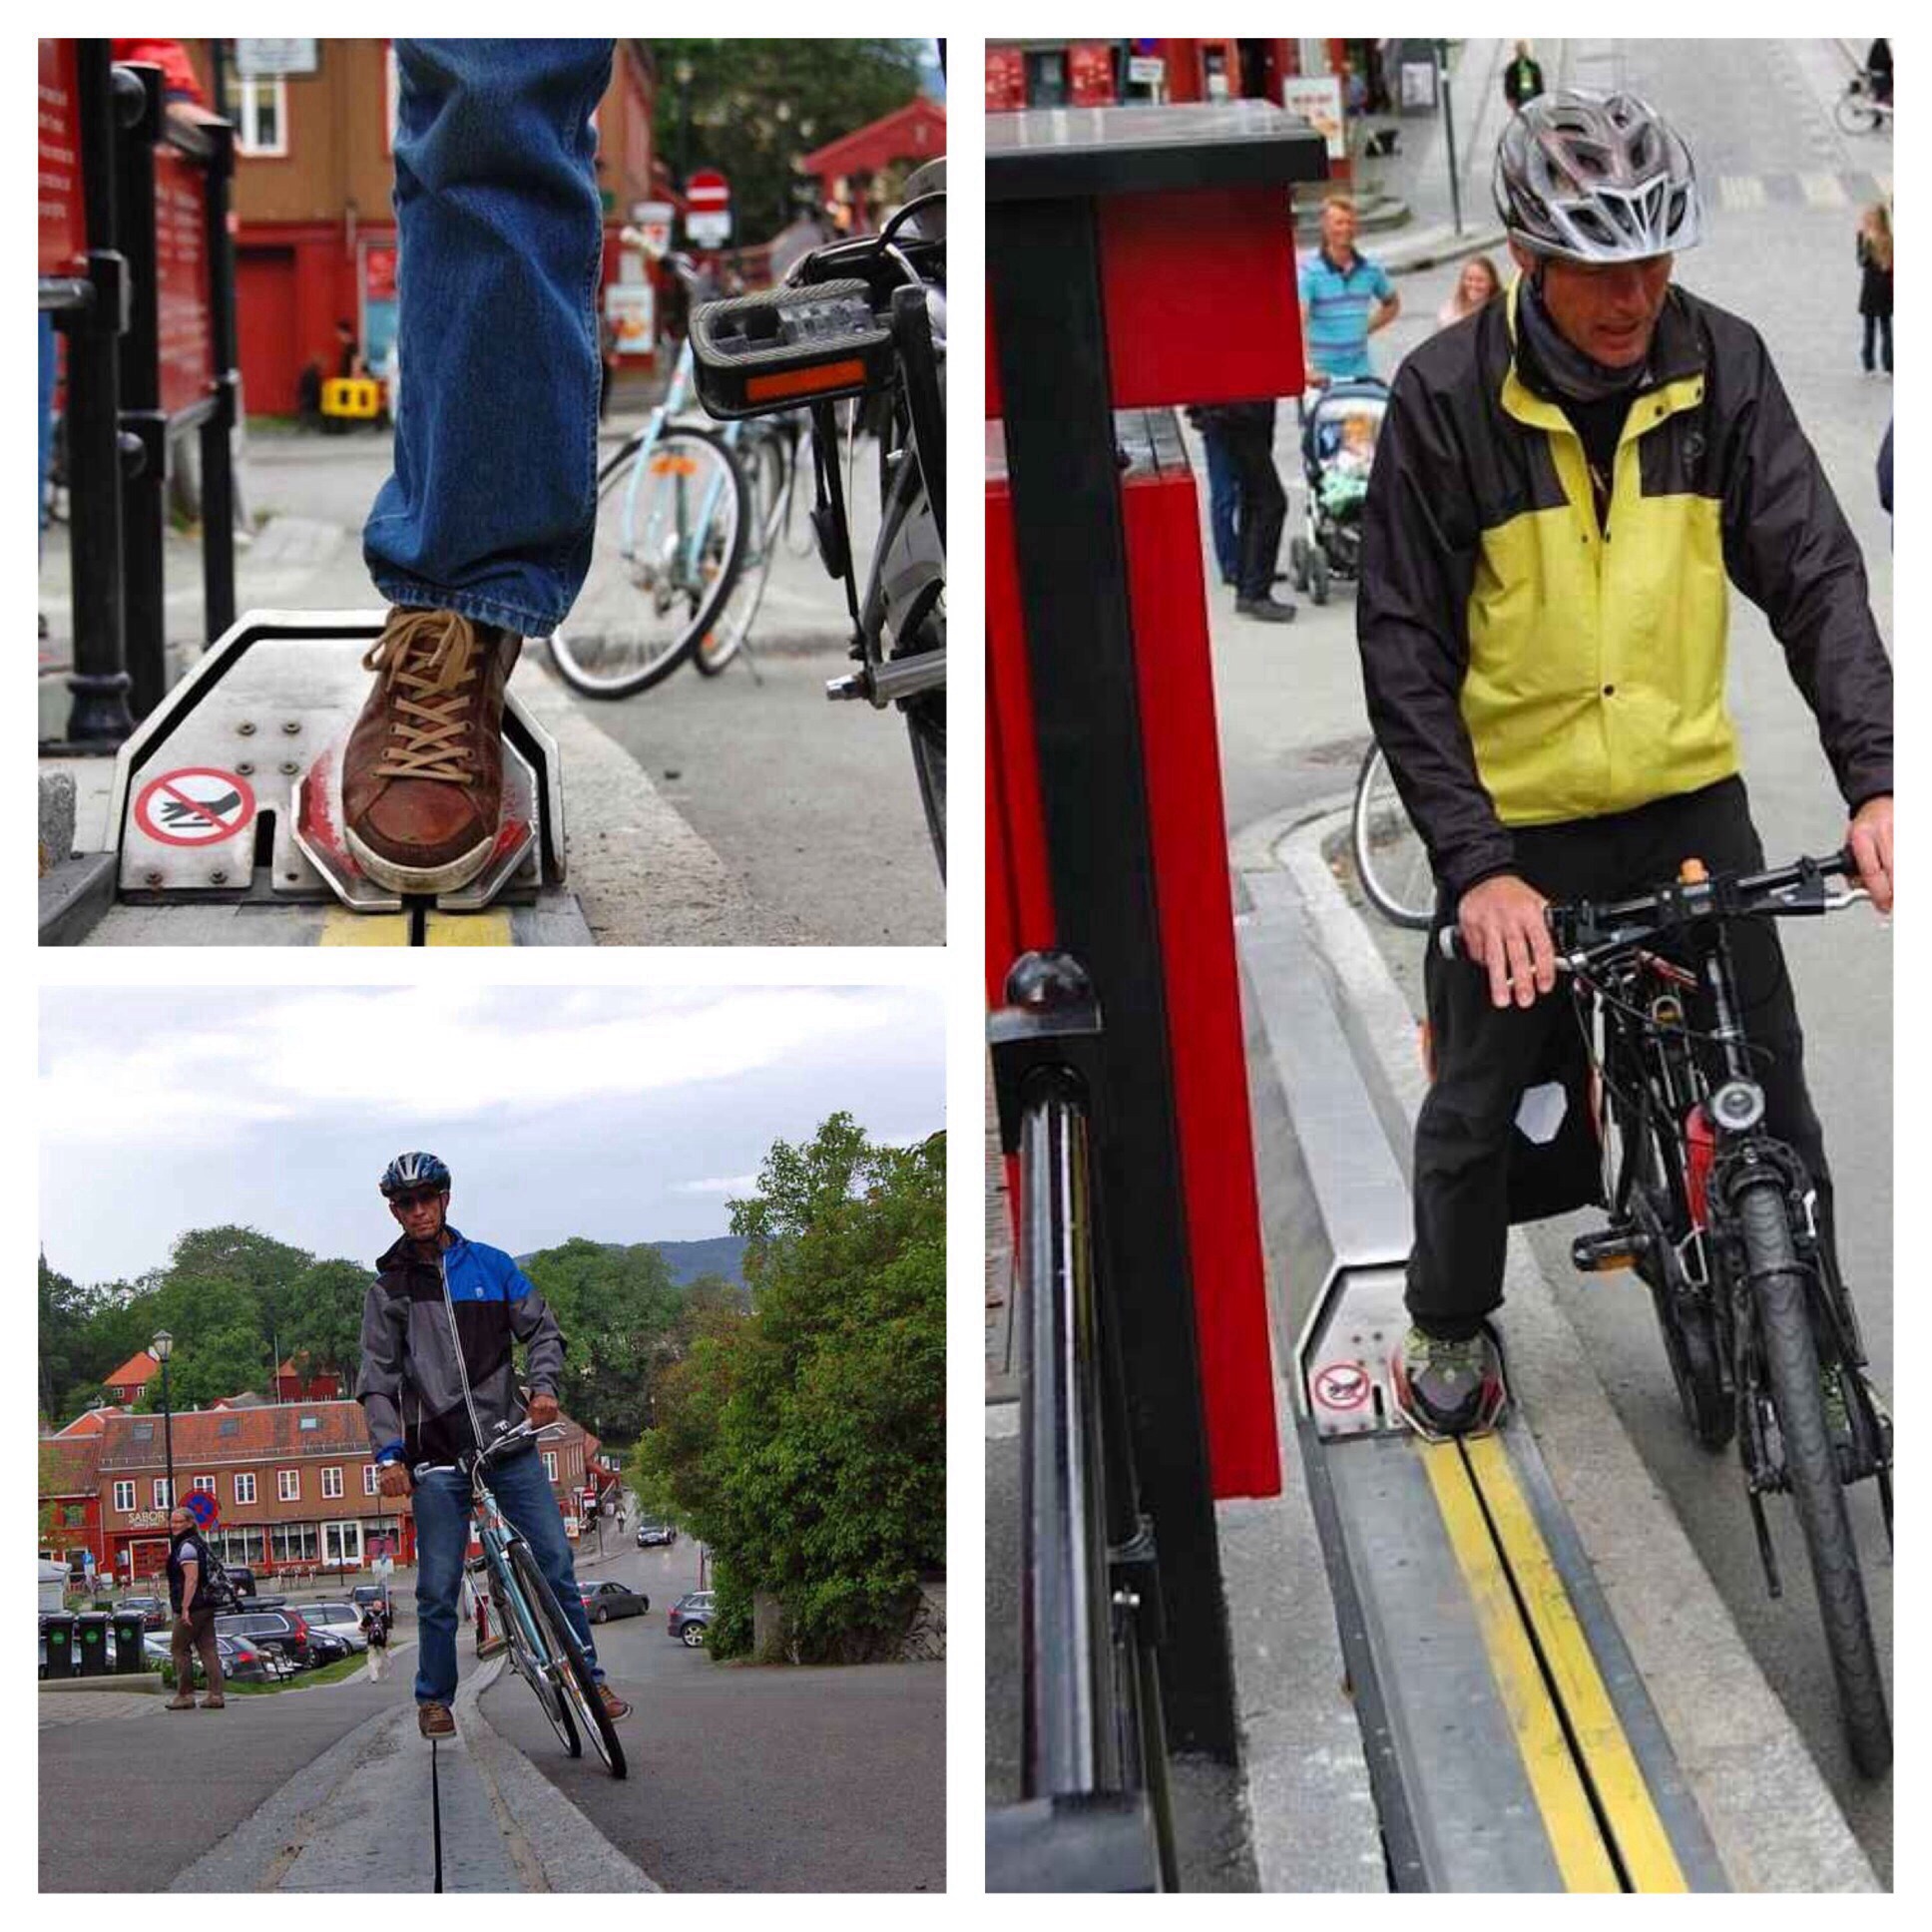 A bicycle escalator in Norway. Has science gone too far?